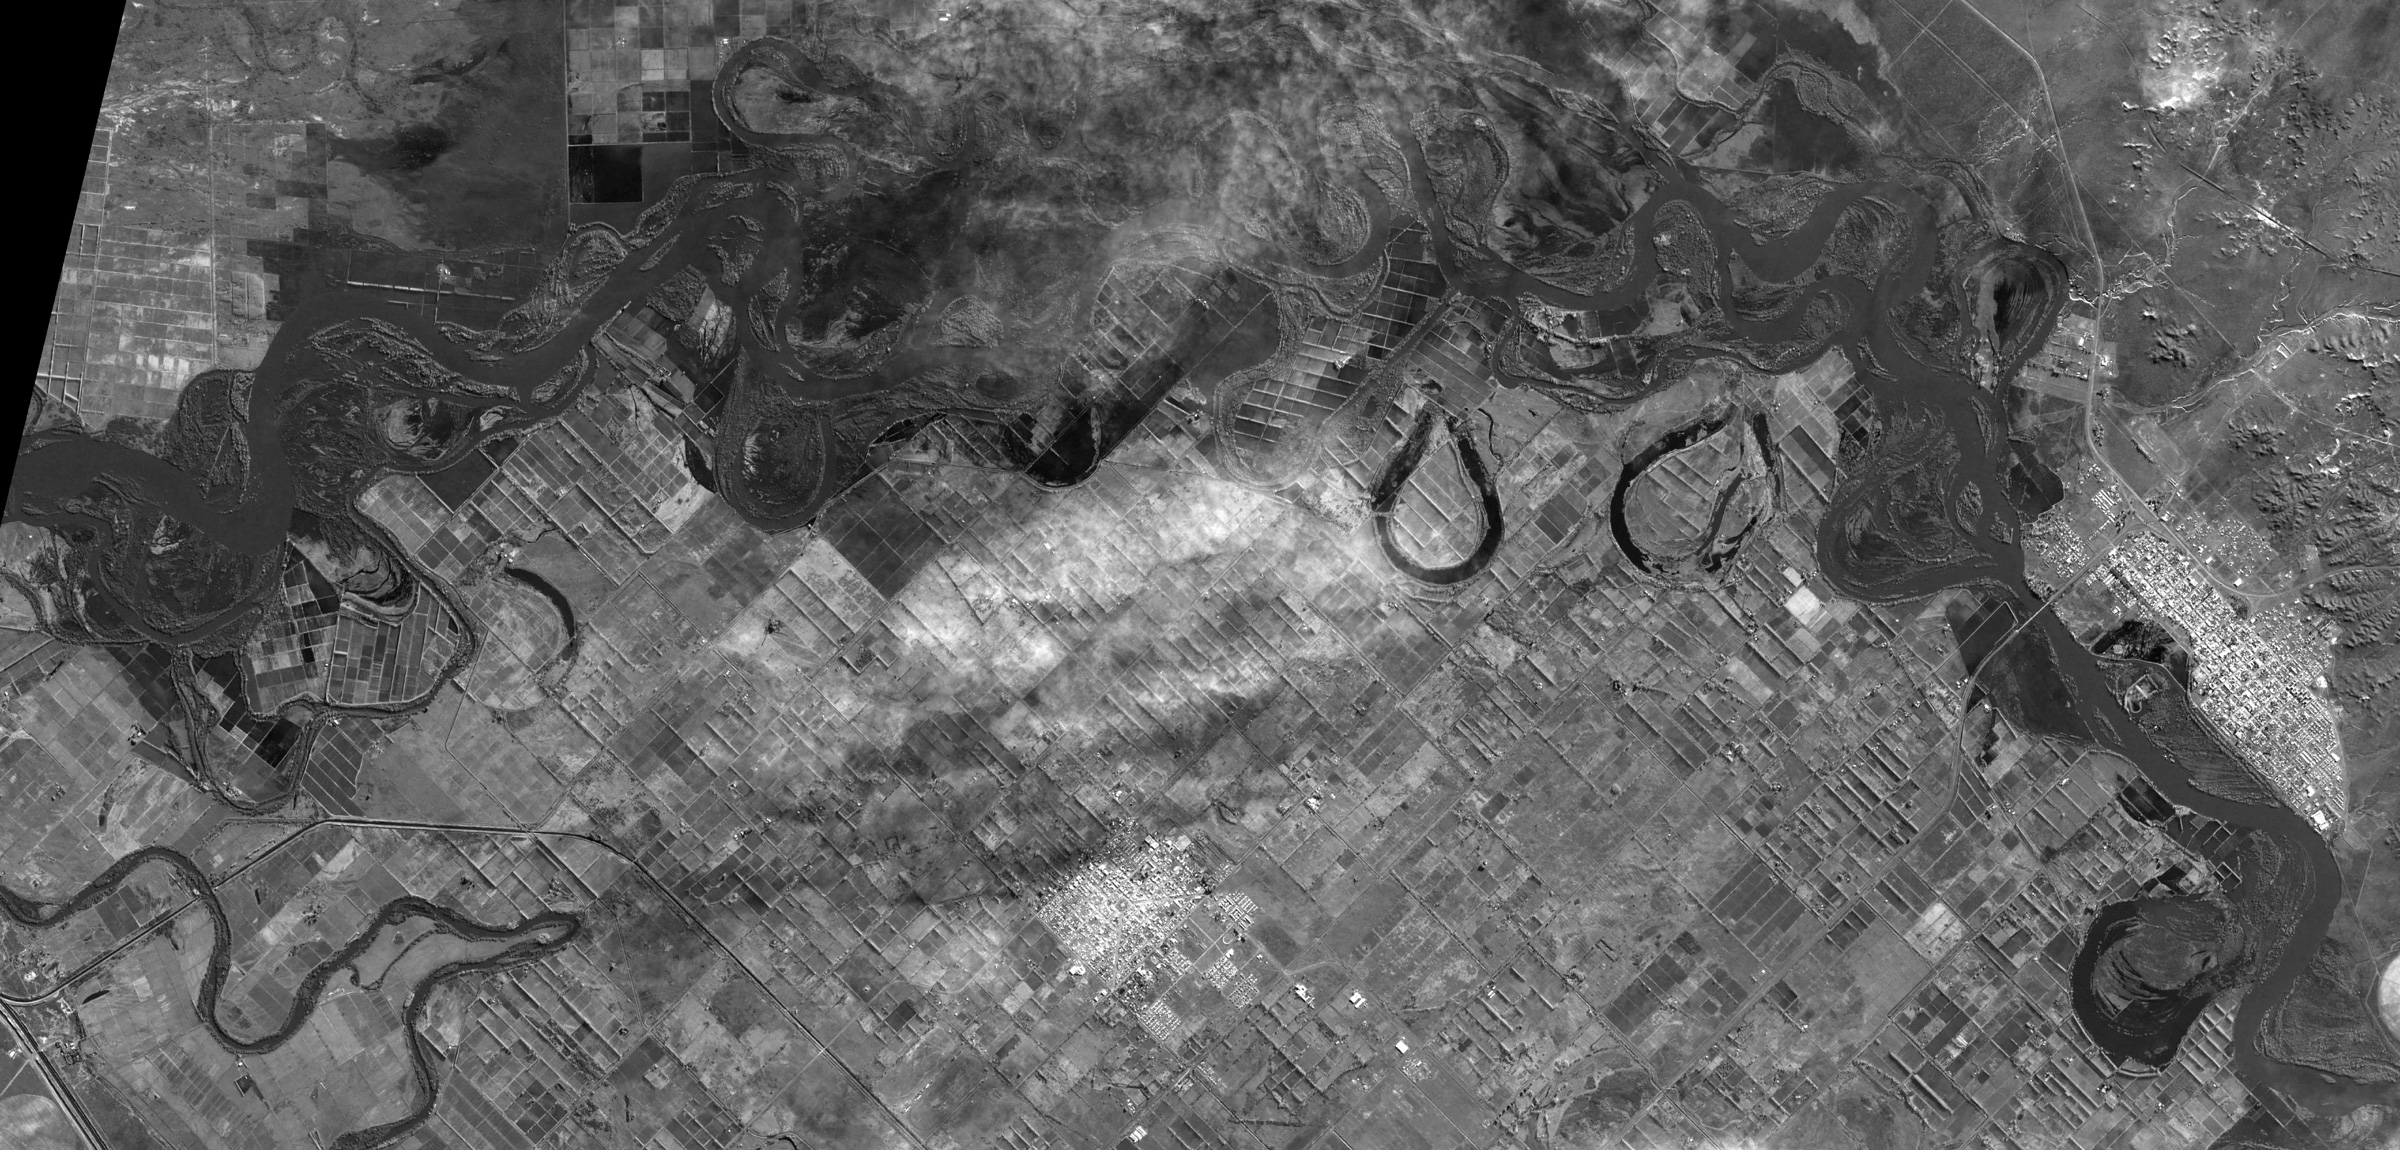 Enlarged Image of Choele-Choel City, Argentina observed by PRISM on Jul. 30, 2006(Post-disaster).